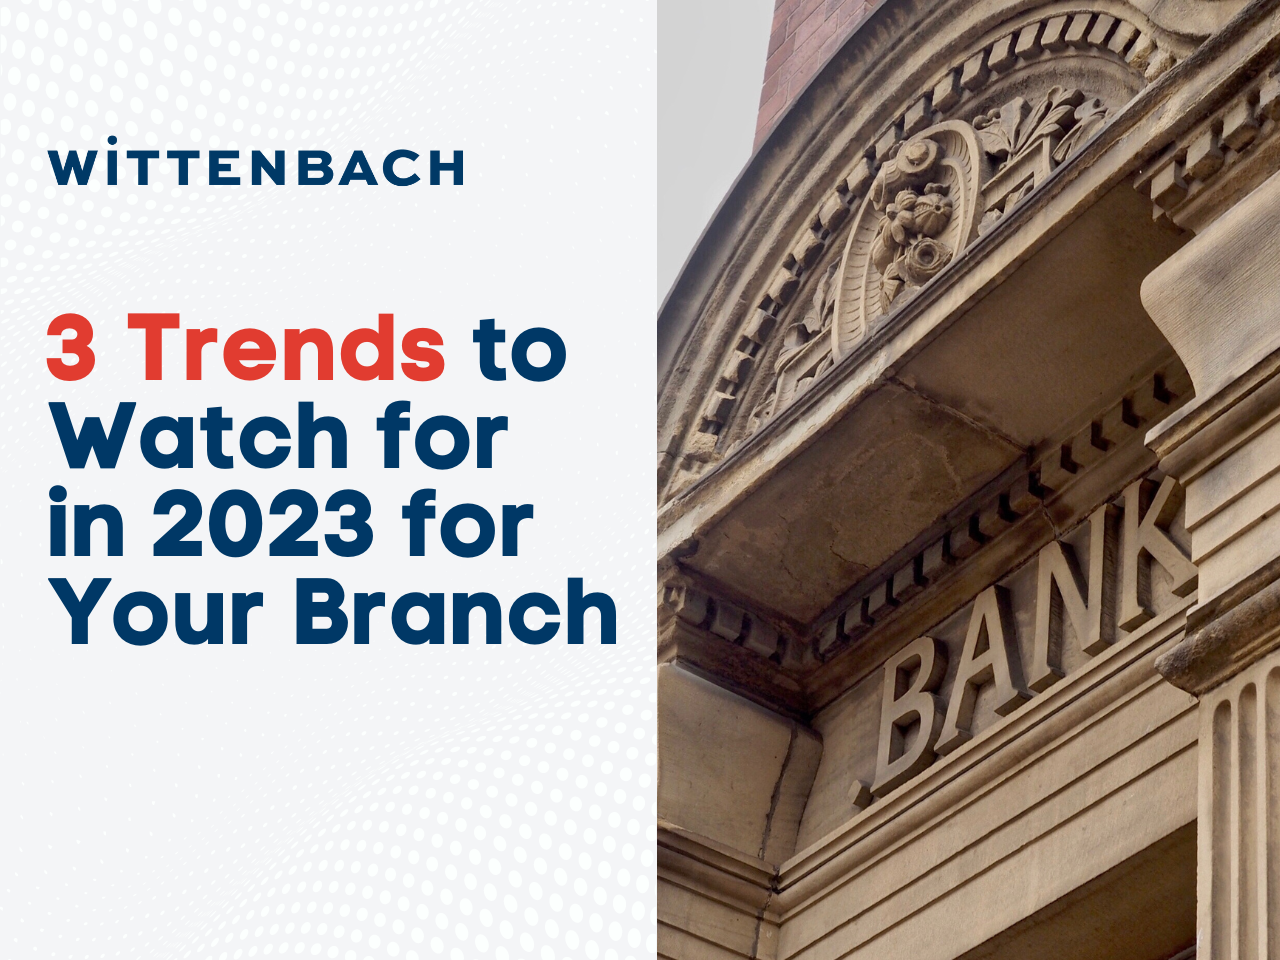 3 Branch Security Trends to Watch for in 2023